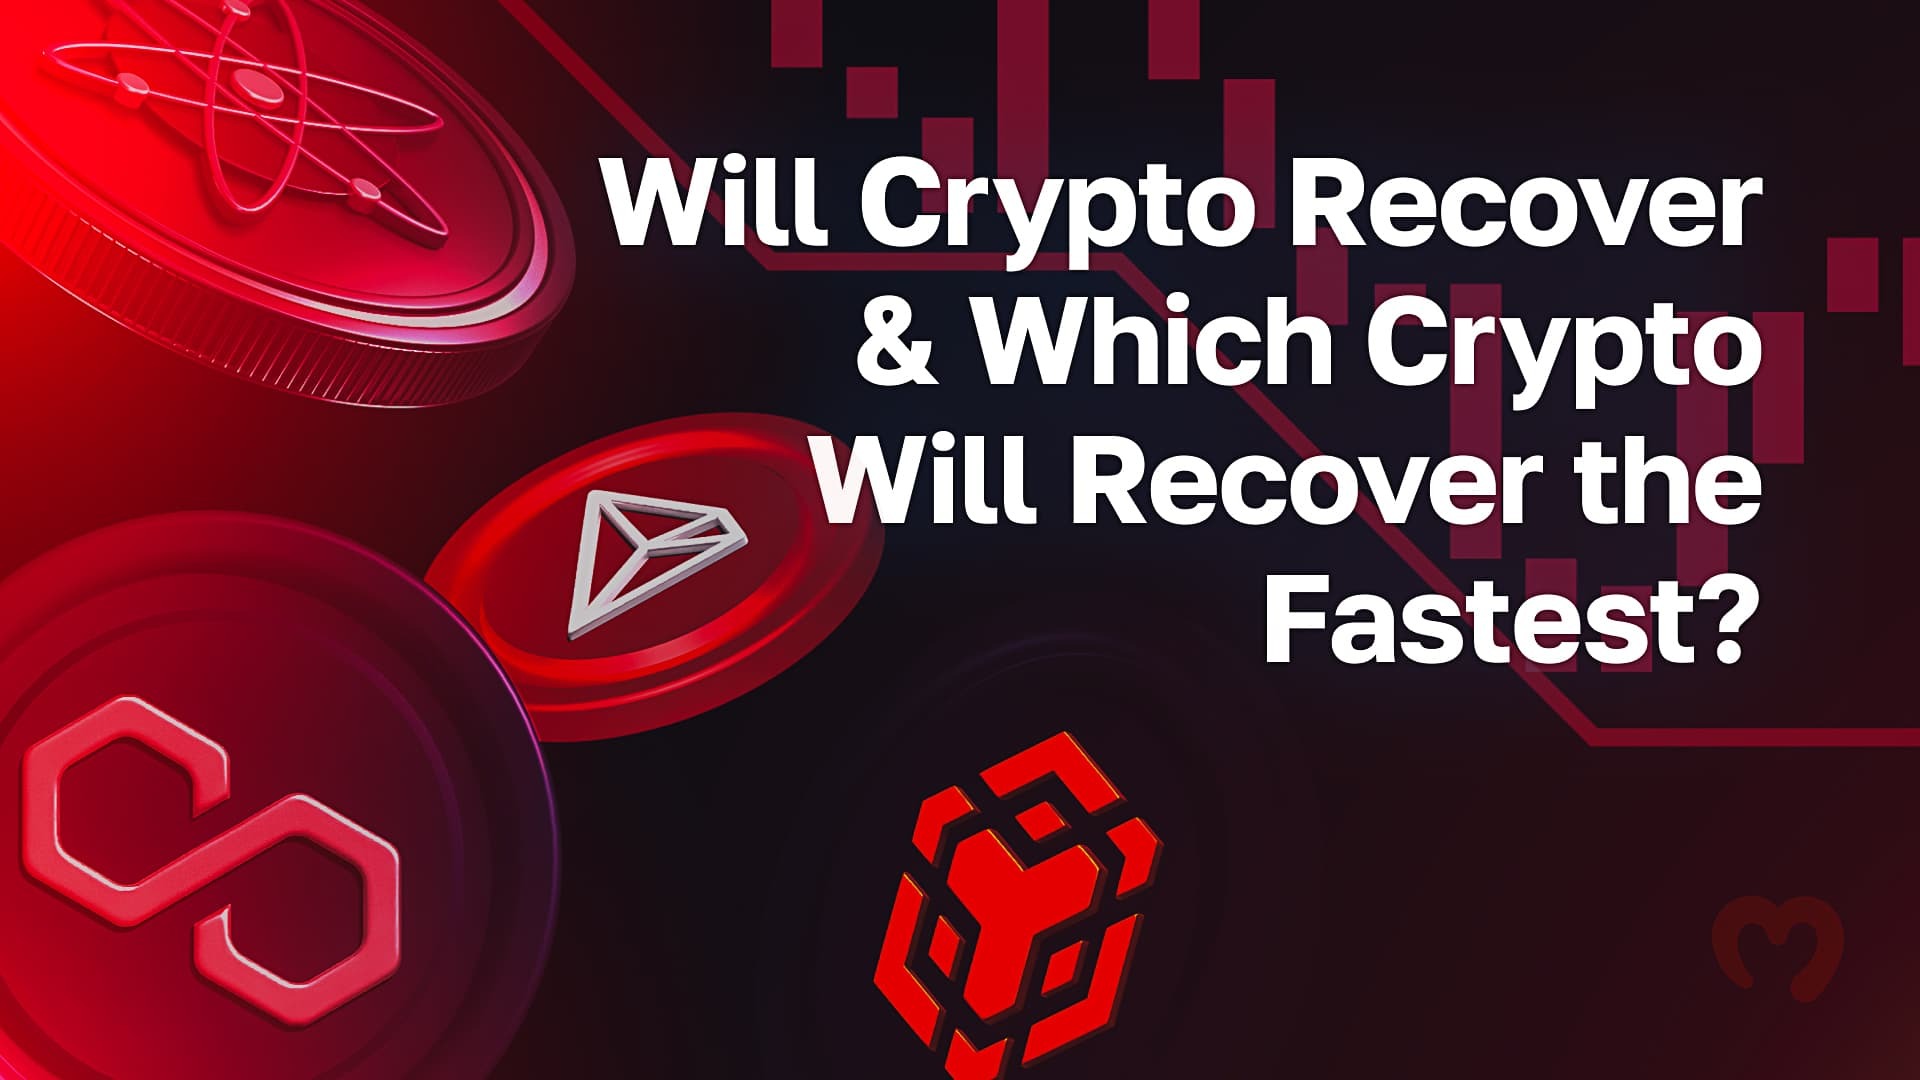 Will Crypto Recover & Which Crypto Will Recover the Fastest?